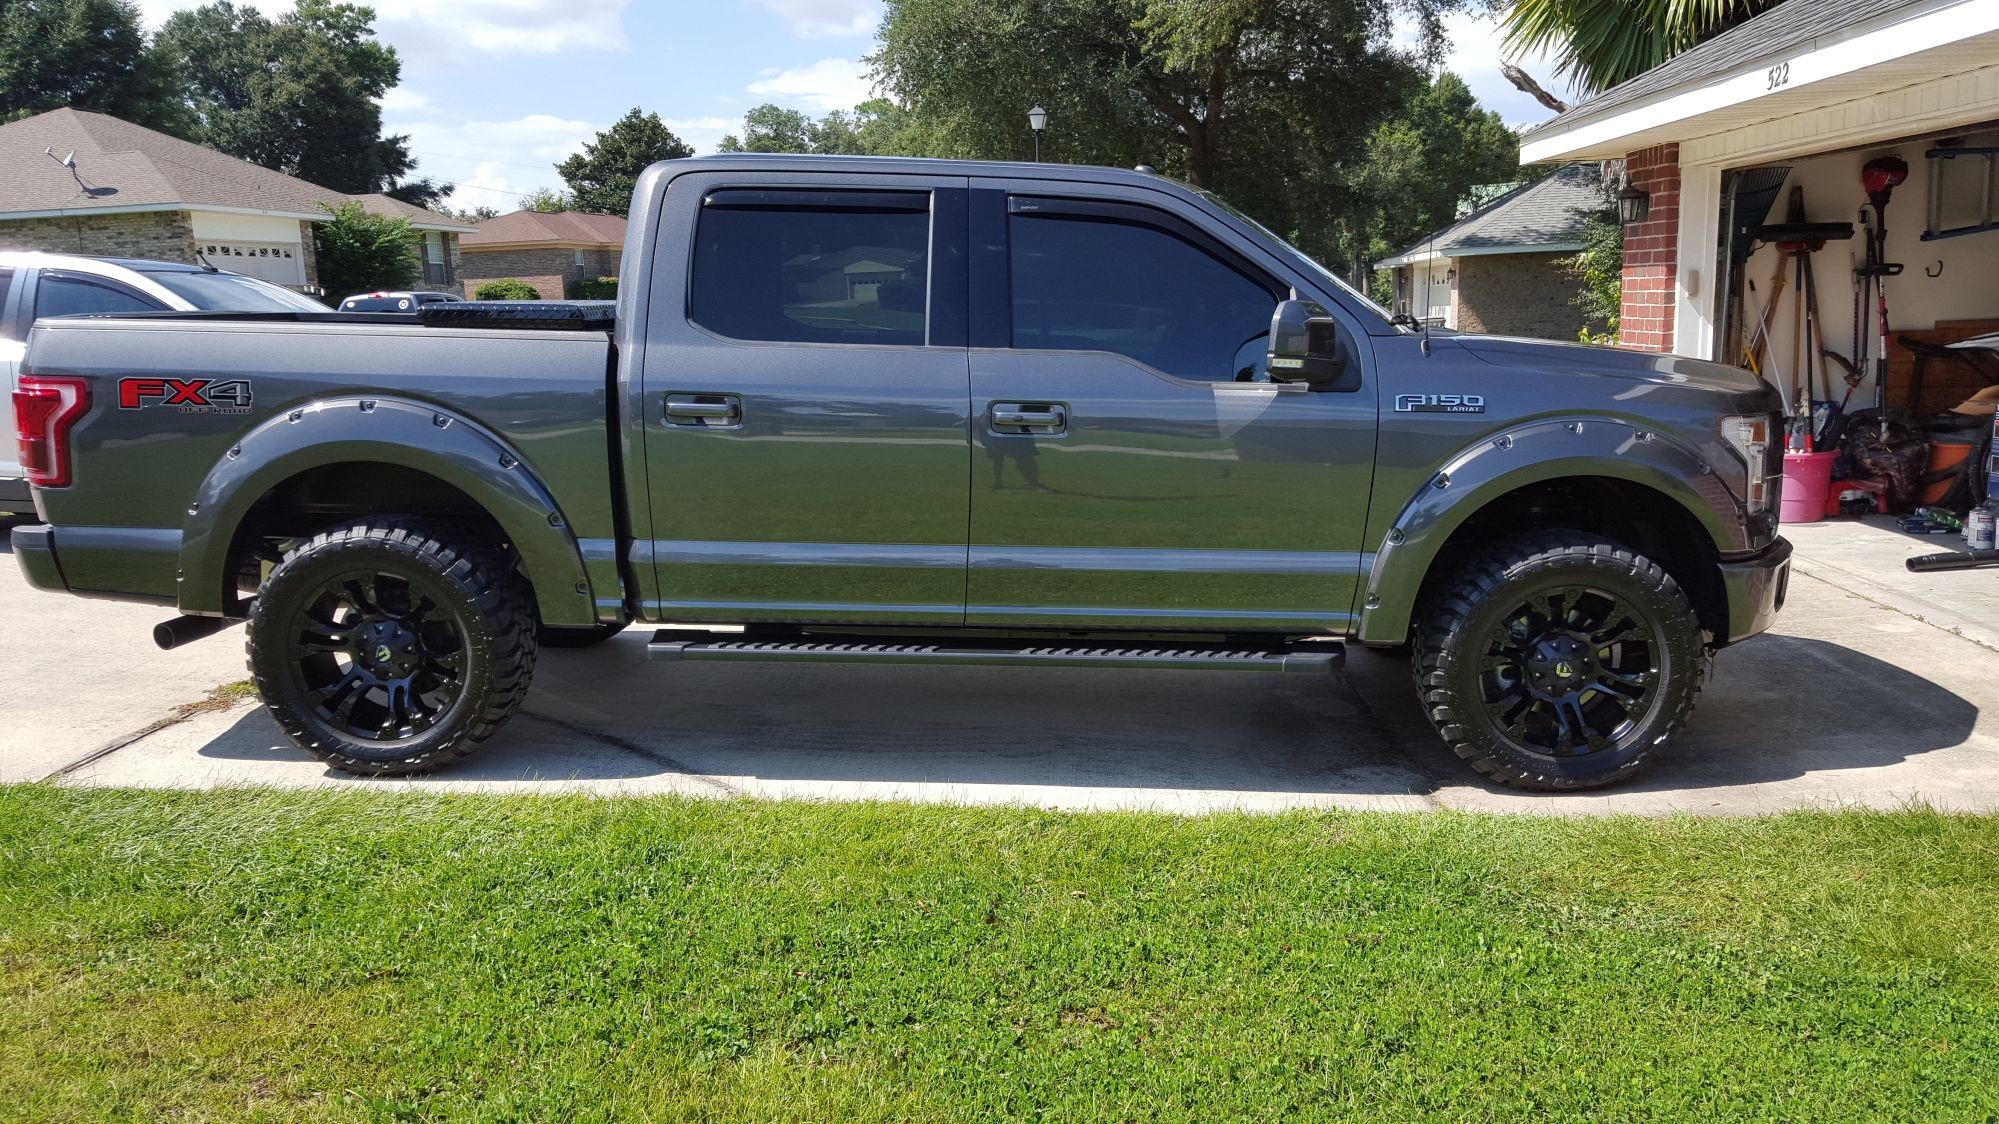 Ford F150 Forum munity of Ford Truck Fans